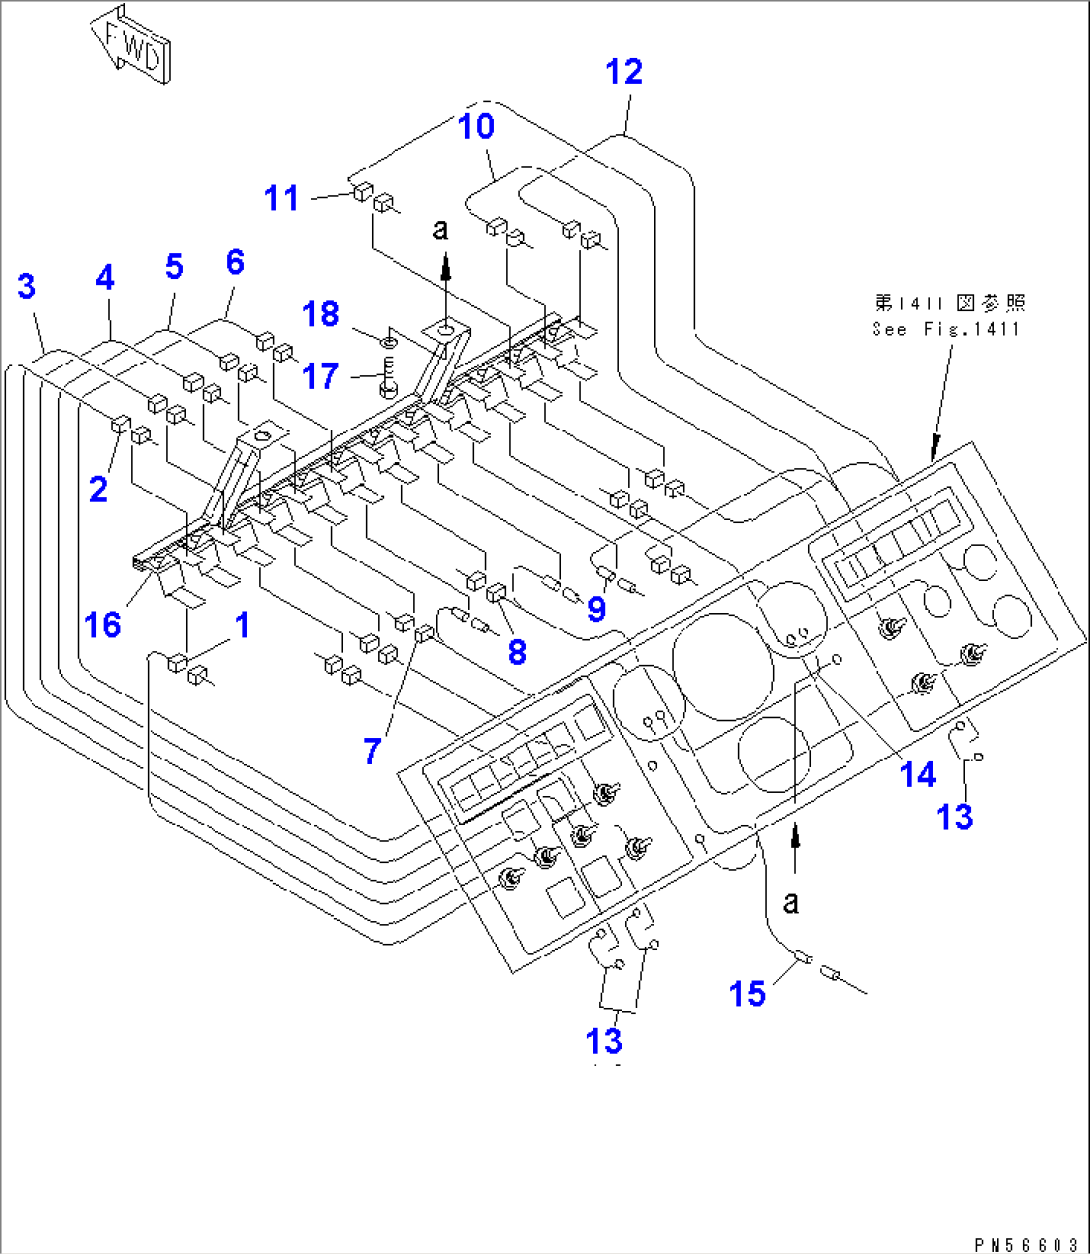 ELECTRICAL SYSTEM (INSTRUMENT PANEL LINE)